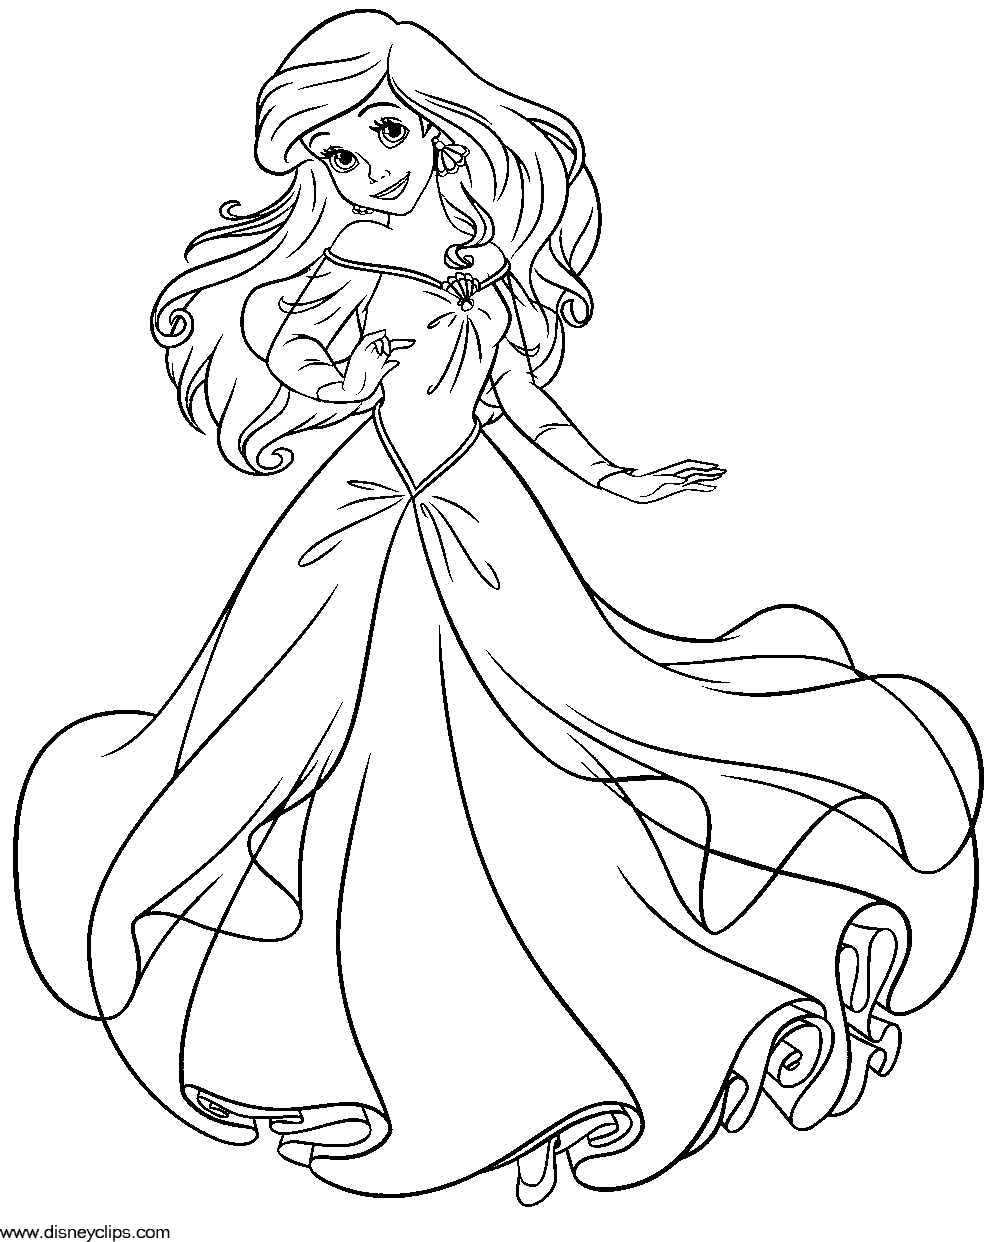 coloring page ariel ariel coloring pages to download and print for free coloring page ariel 